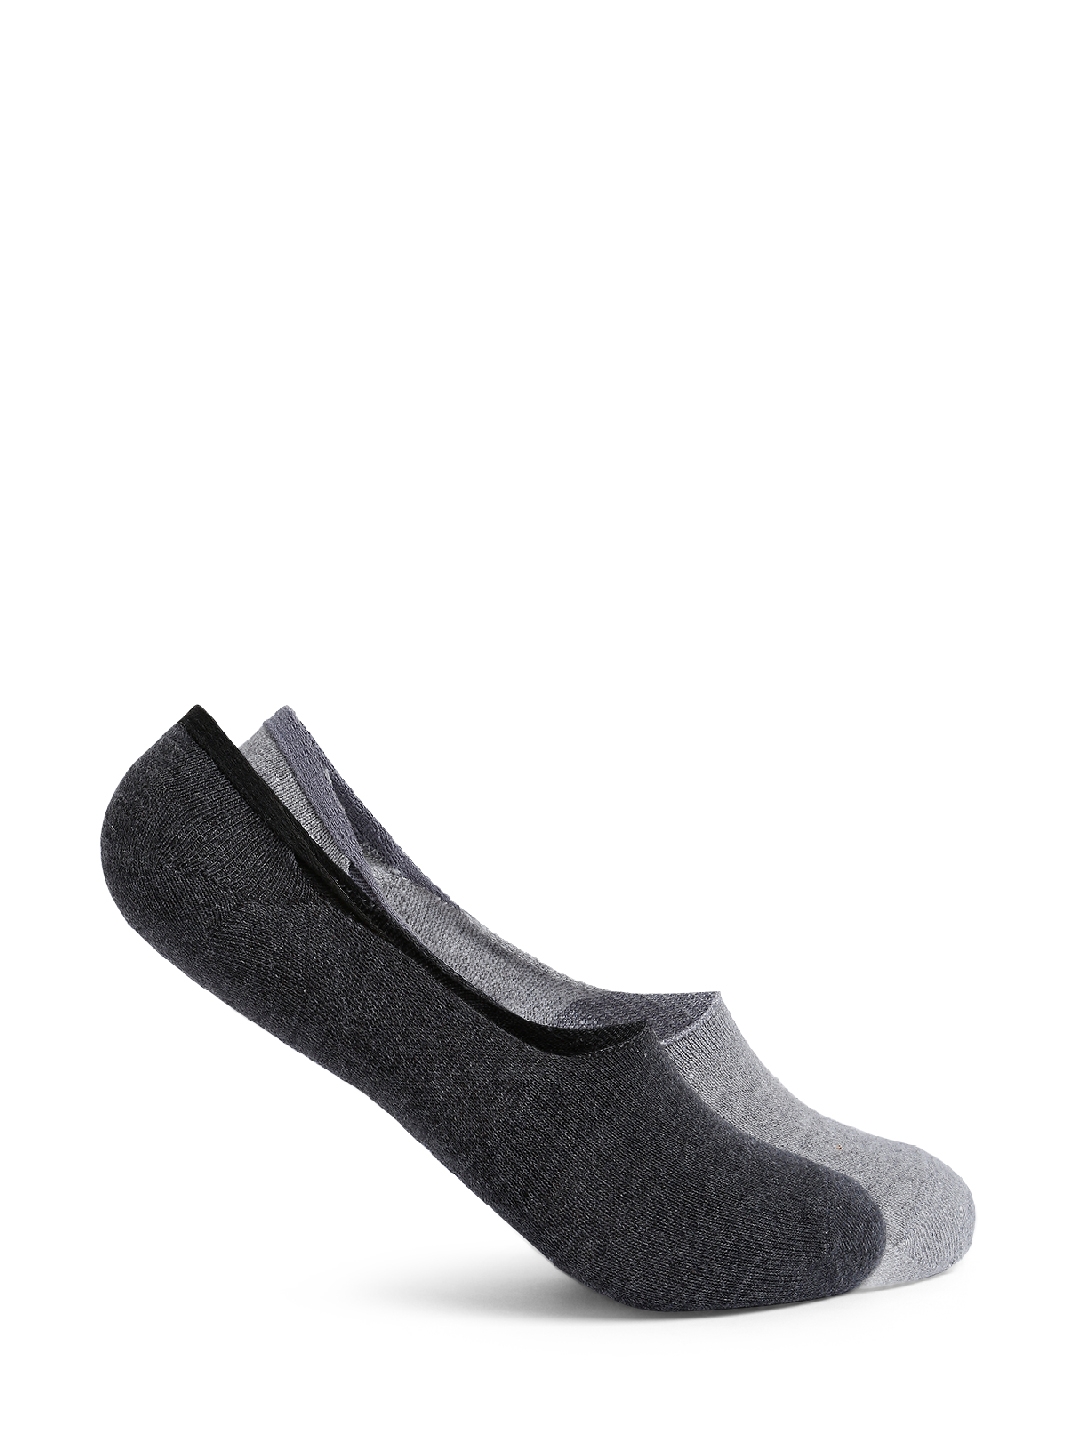 Smarty Pants | Smarty Pants women's pack of 2 loafer style cotton socks. 